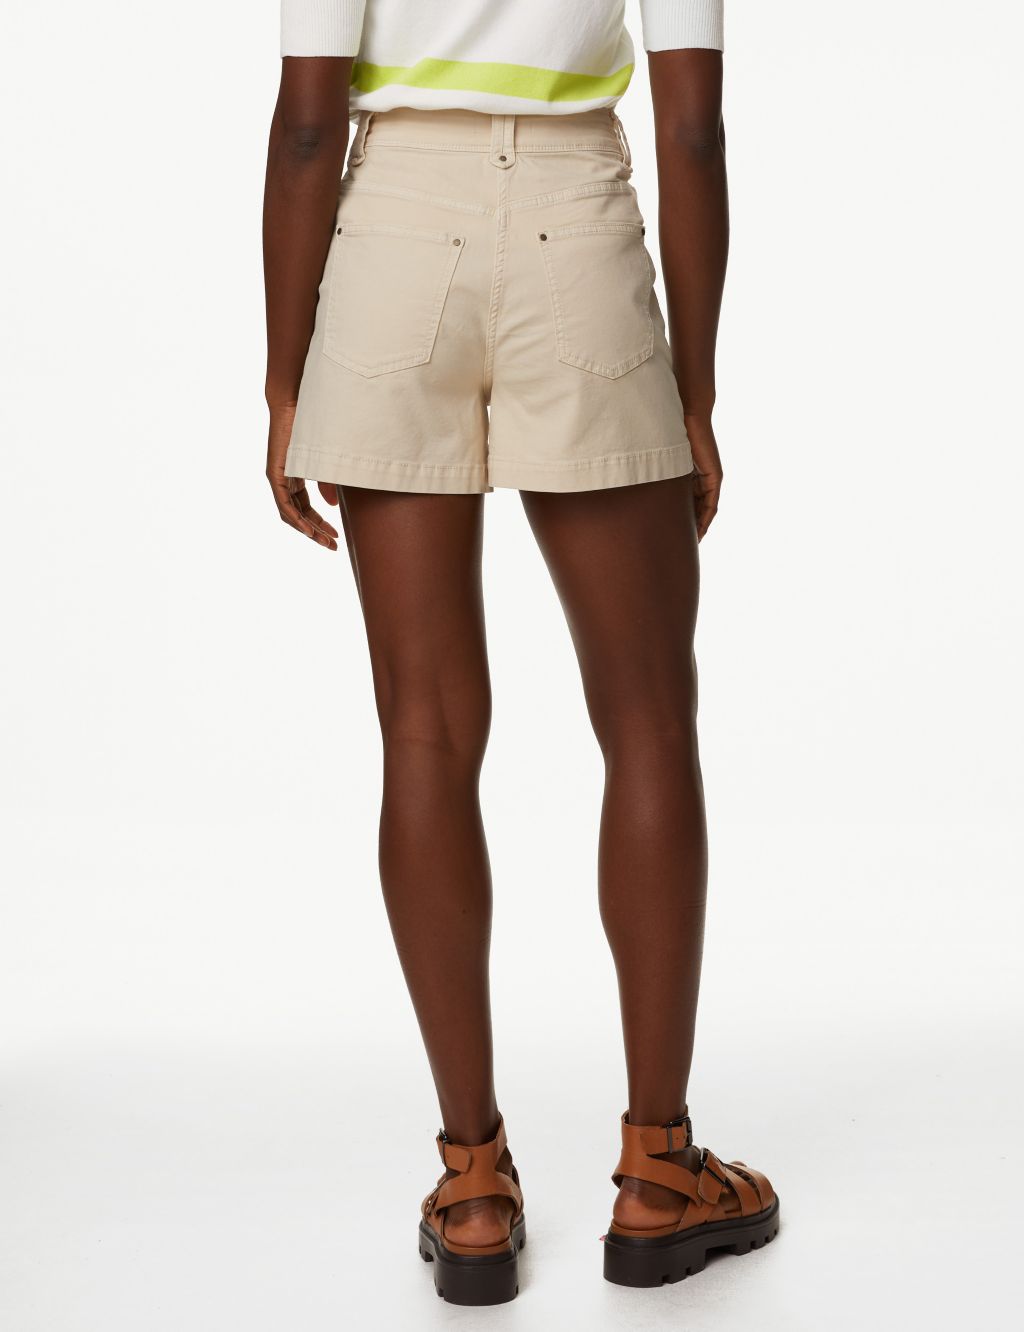 Cotton Rich High Waisted Utility Shorts image 3